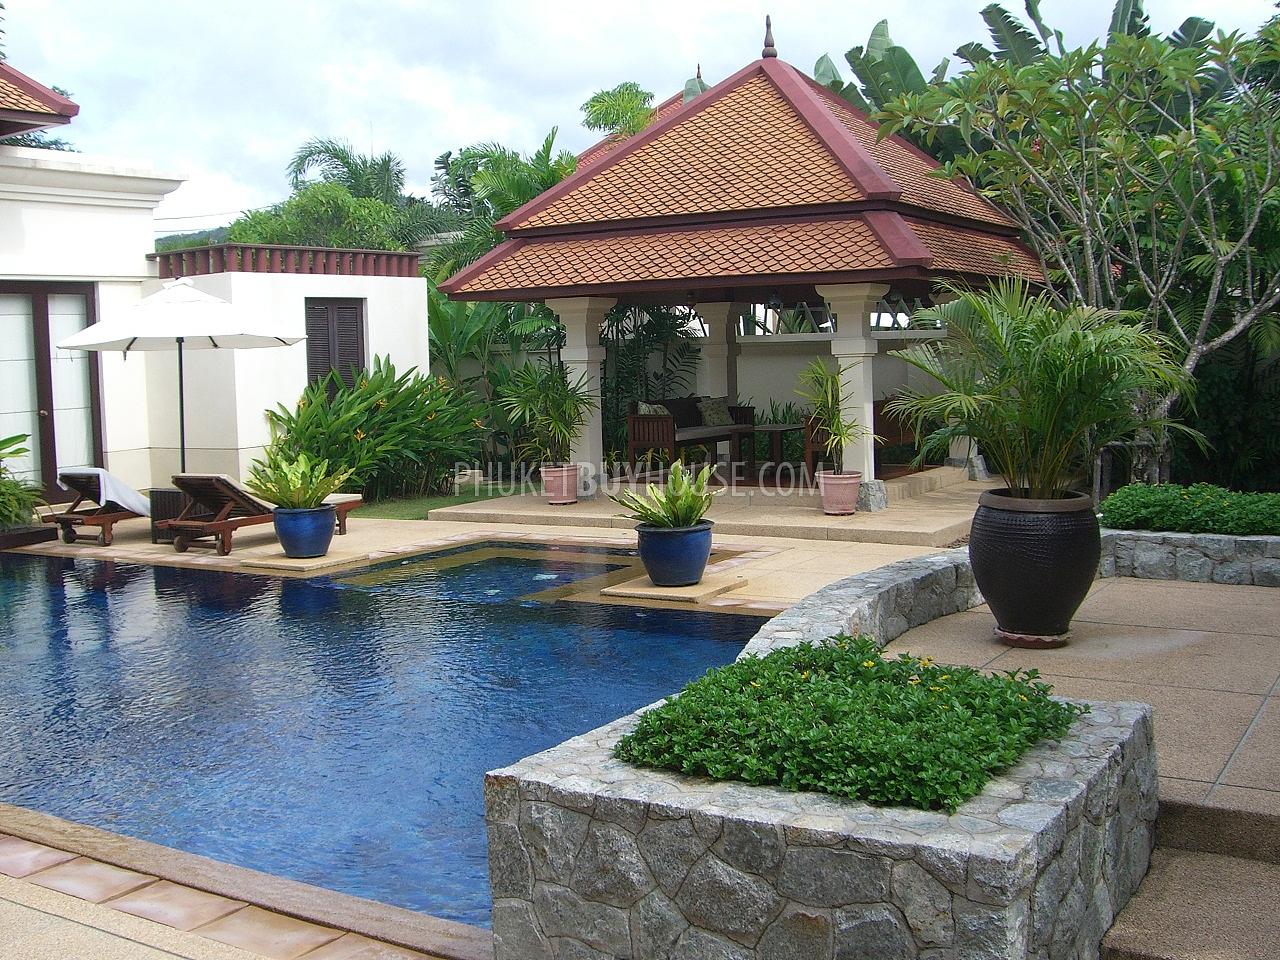 BAN1211: Villa with overlooks the Pool and exquisite Thai garden. Фото #3